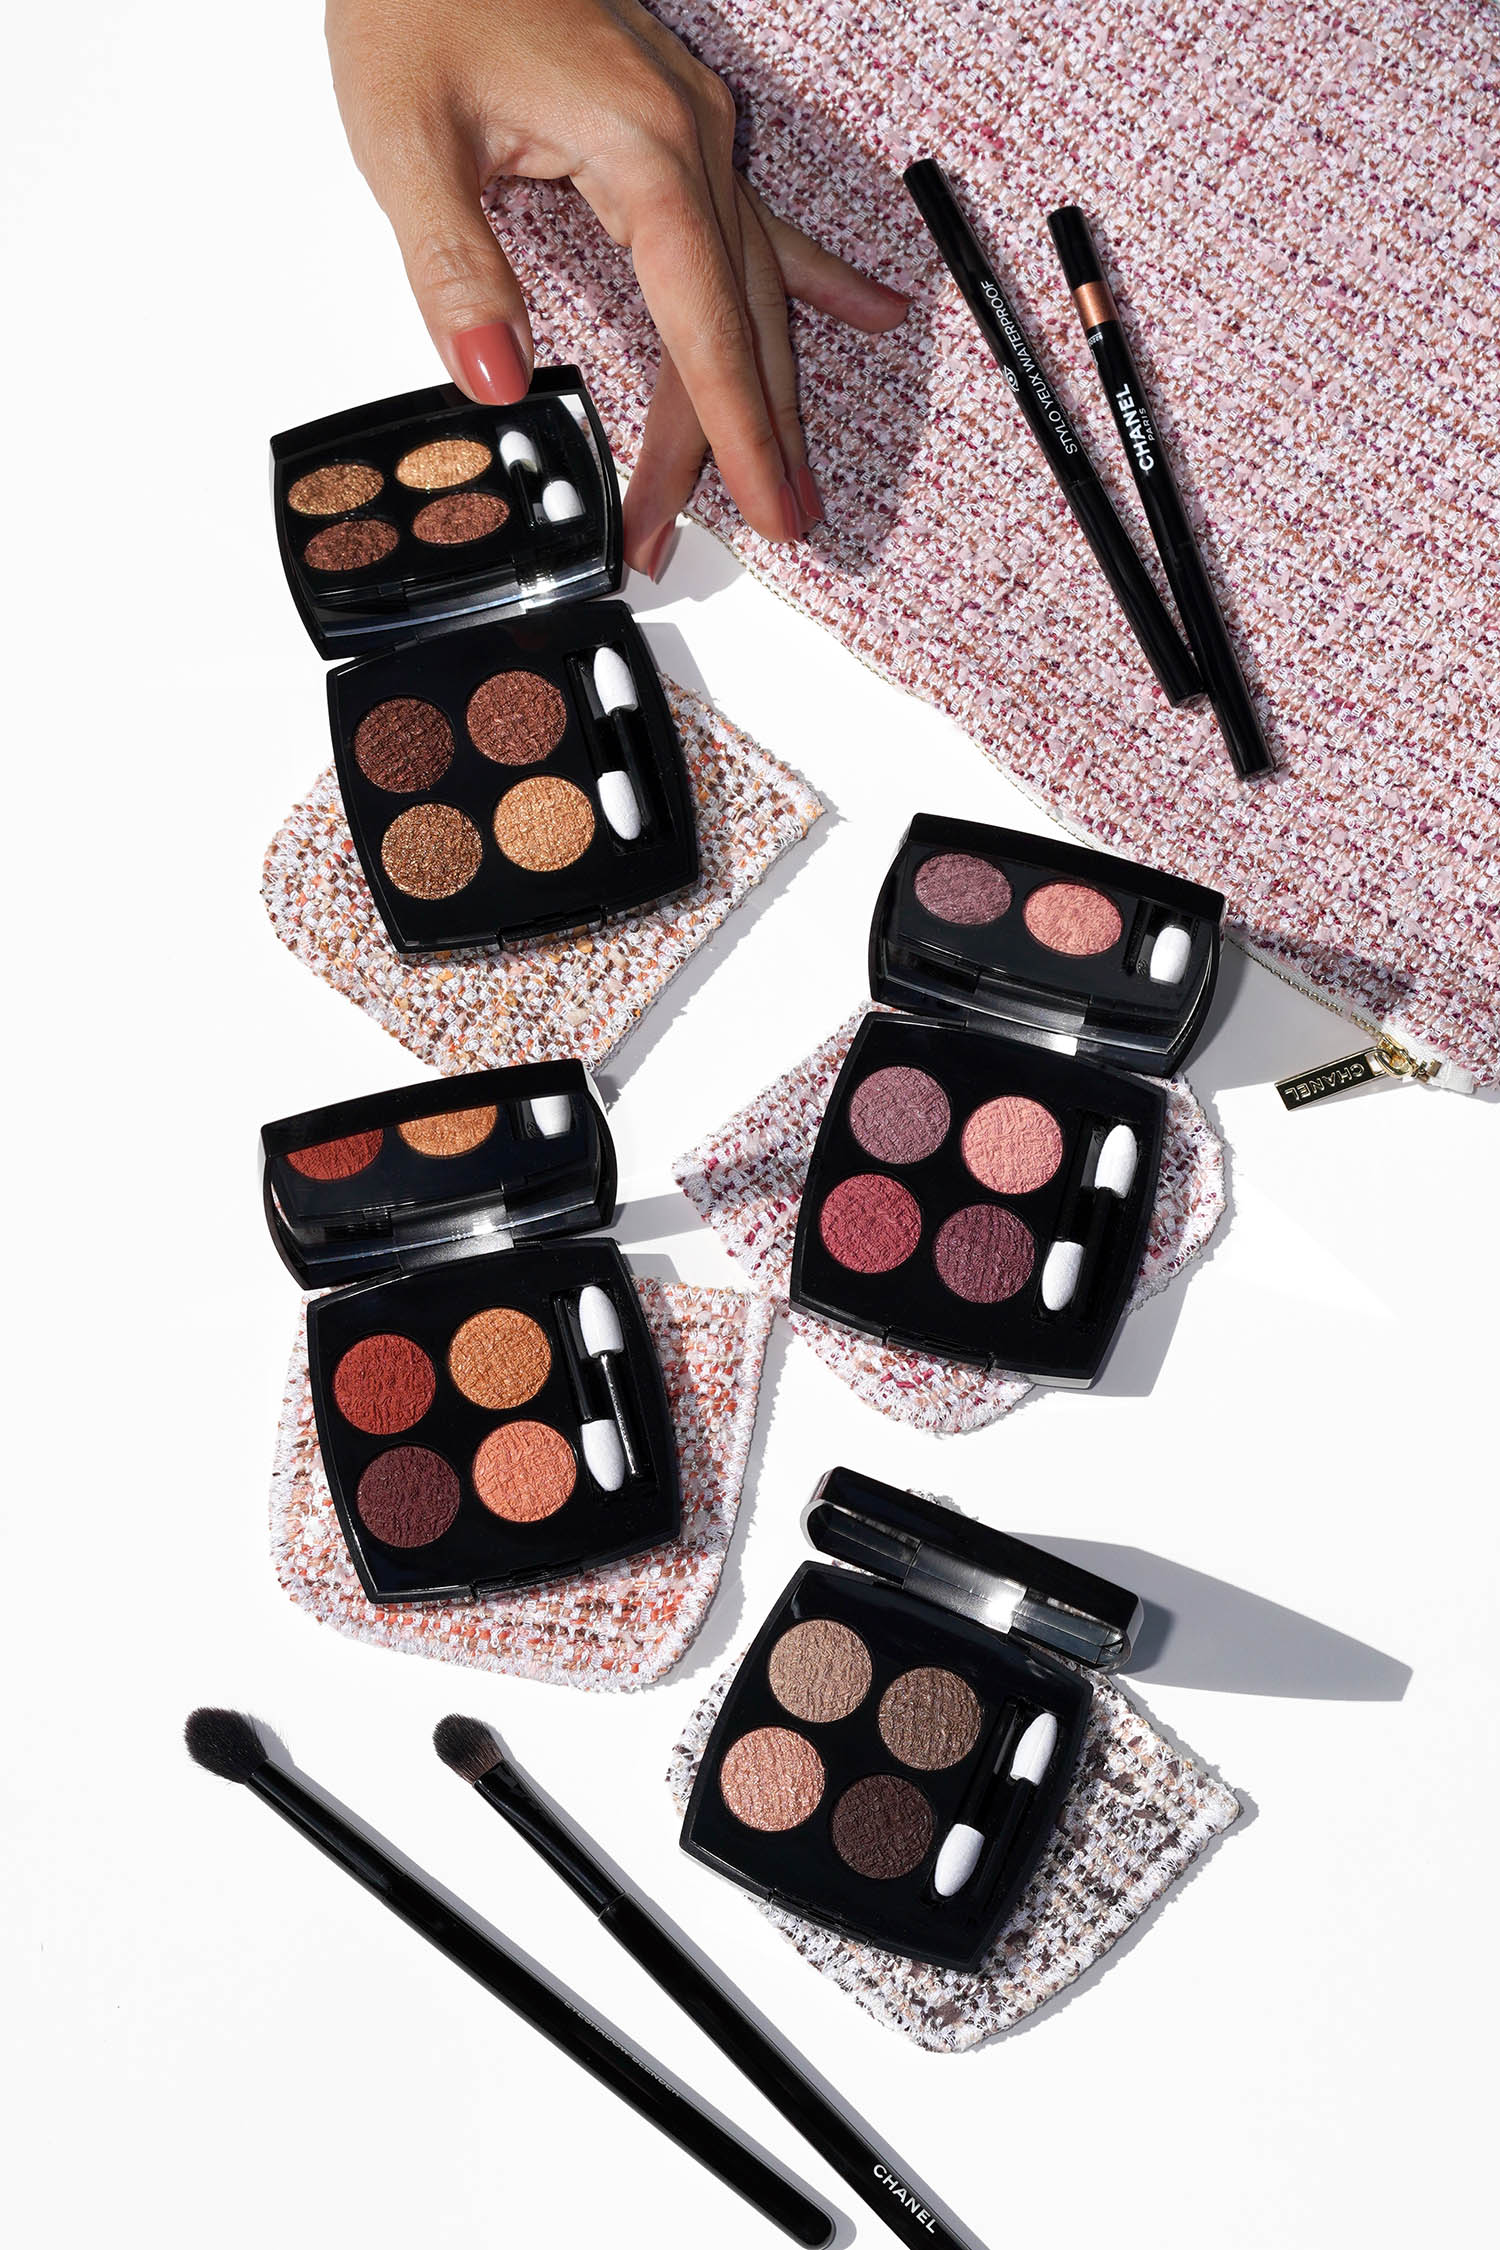 Encommium hjul Indvandring New Chanel Les 4 Ombres Tweed Eyeshadows - The Beauty Look Book